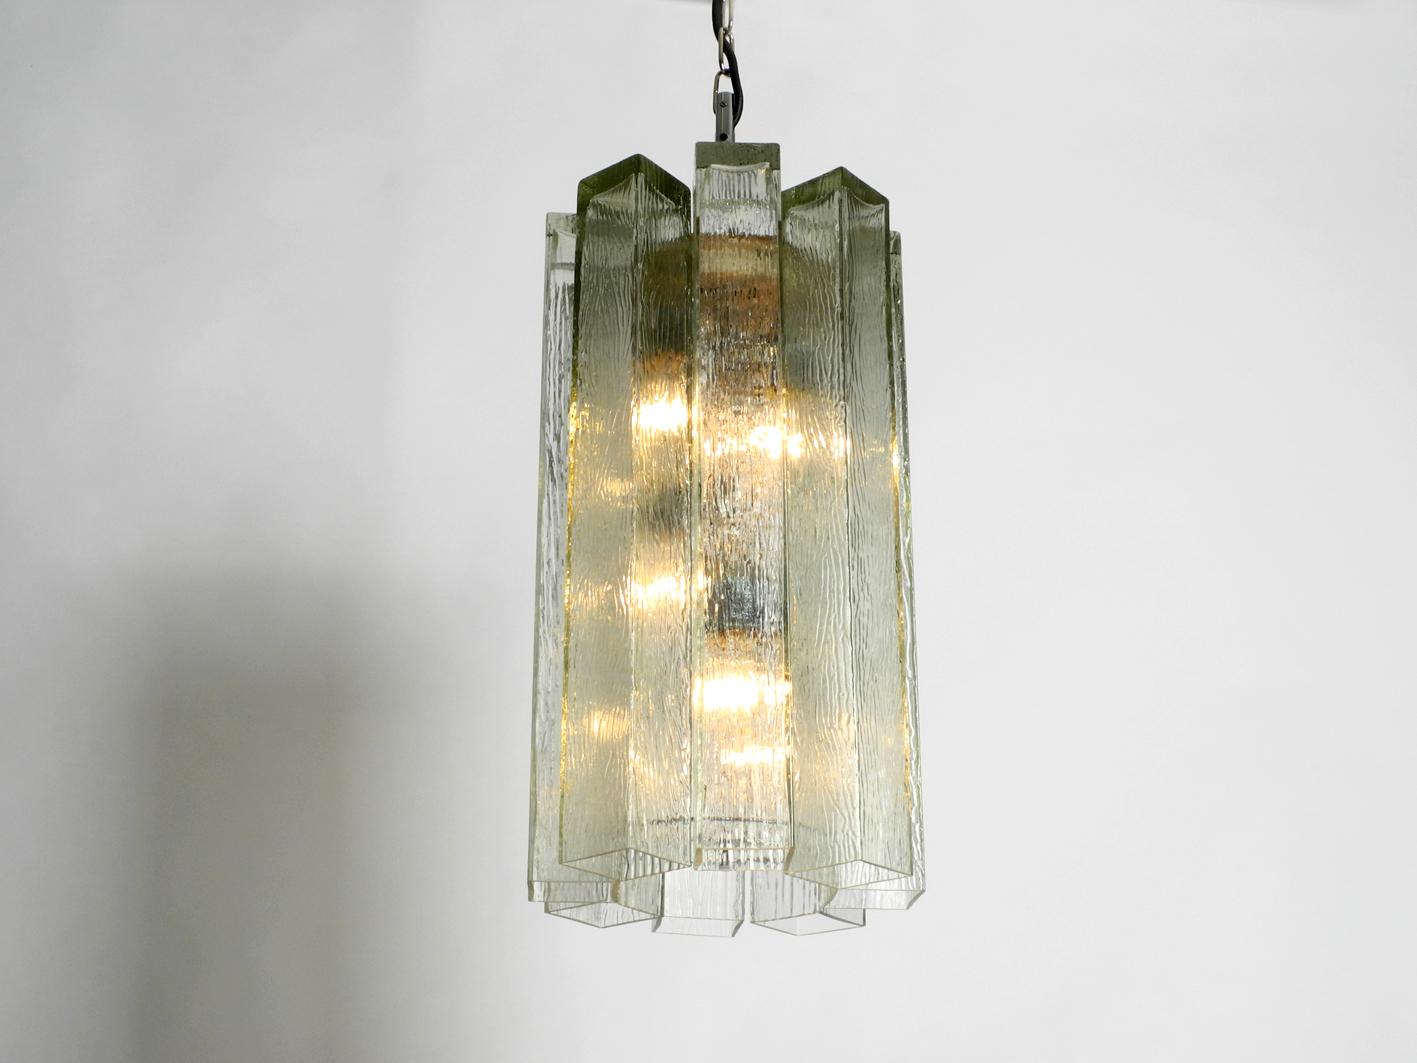 Very high quality rare Mid-Century Modern large glass pendant lamp by Doria.
Very classy minimalistic 1950s Brutalist design.
Eight long square massive glass elements in light green are hung in a like a star.
Makes a great charming light and is